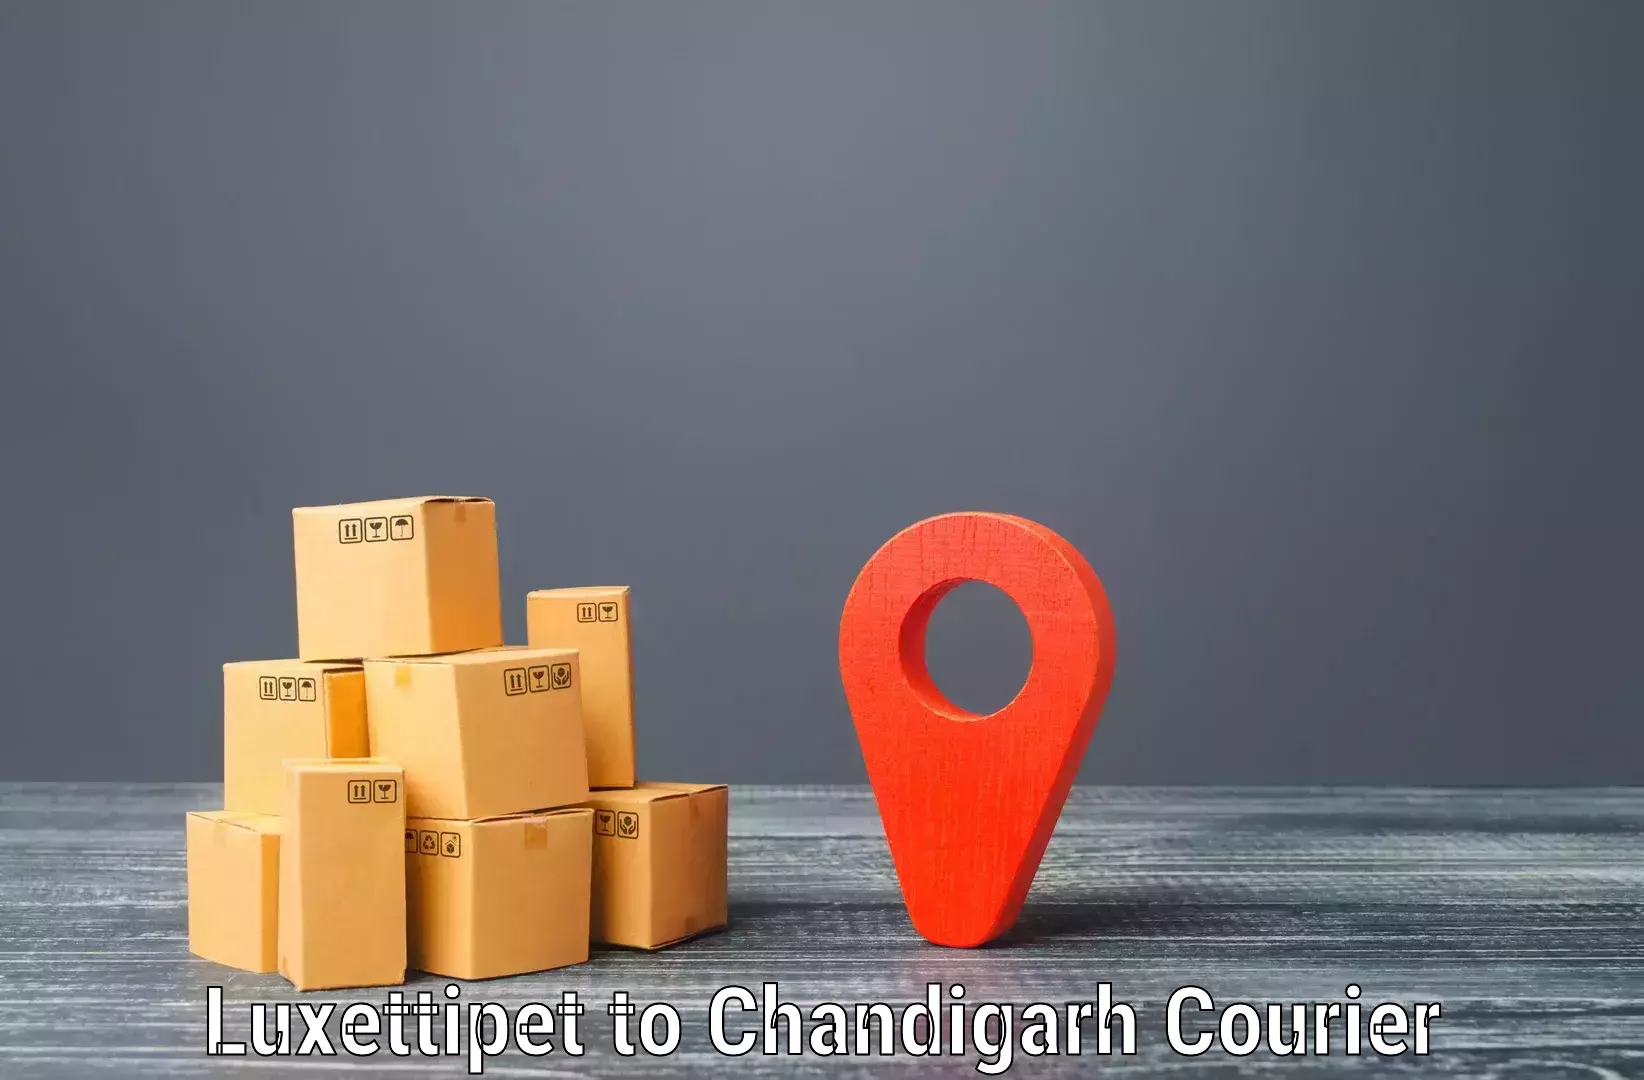 Flexible parcel services in Luxettipet to Chandigarh